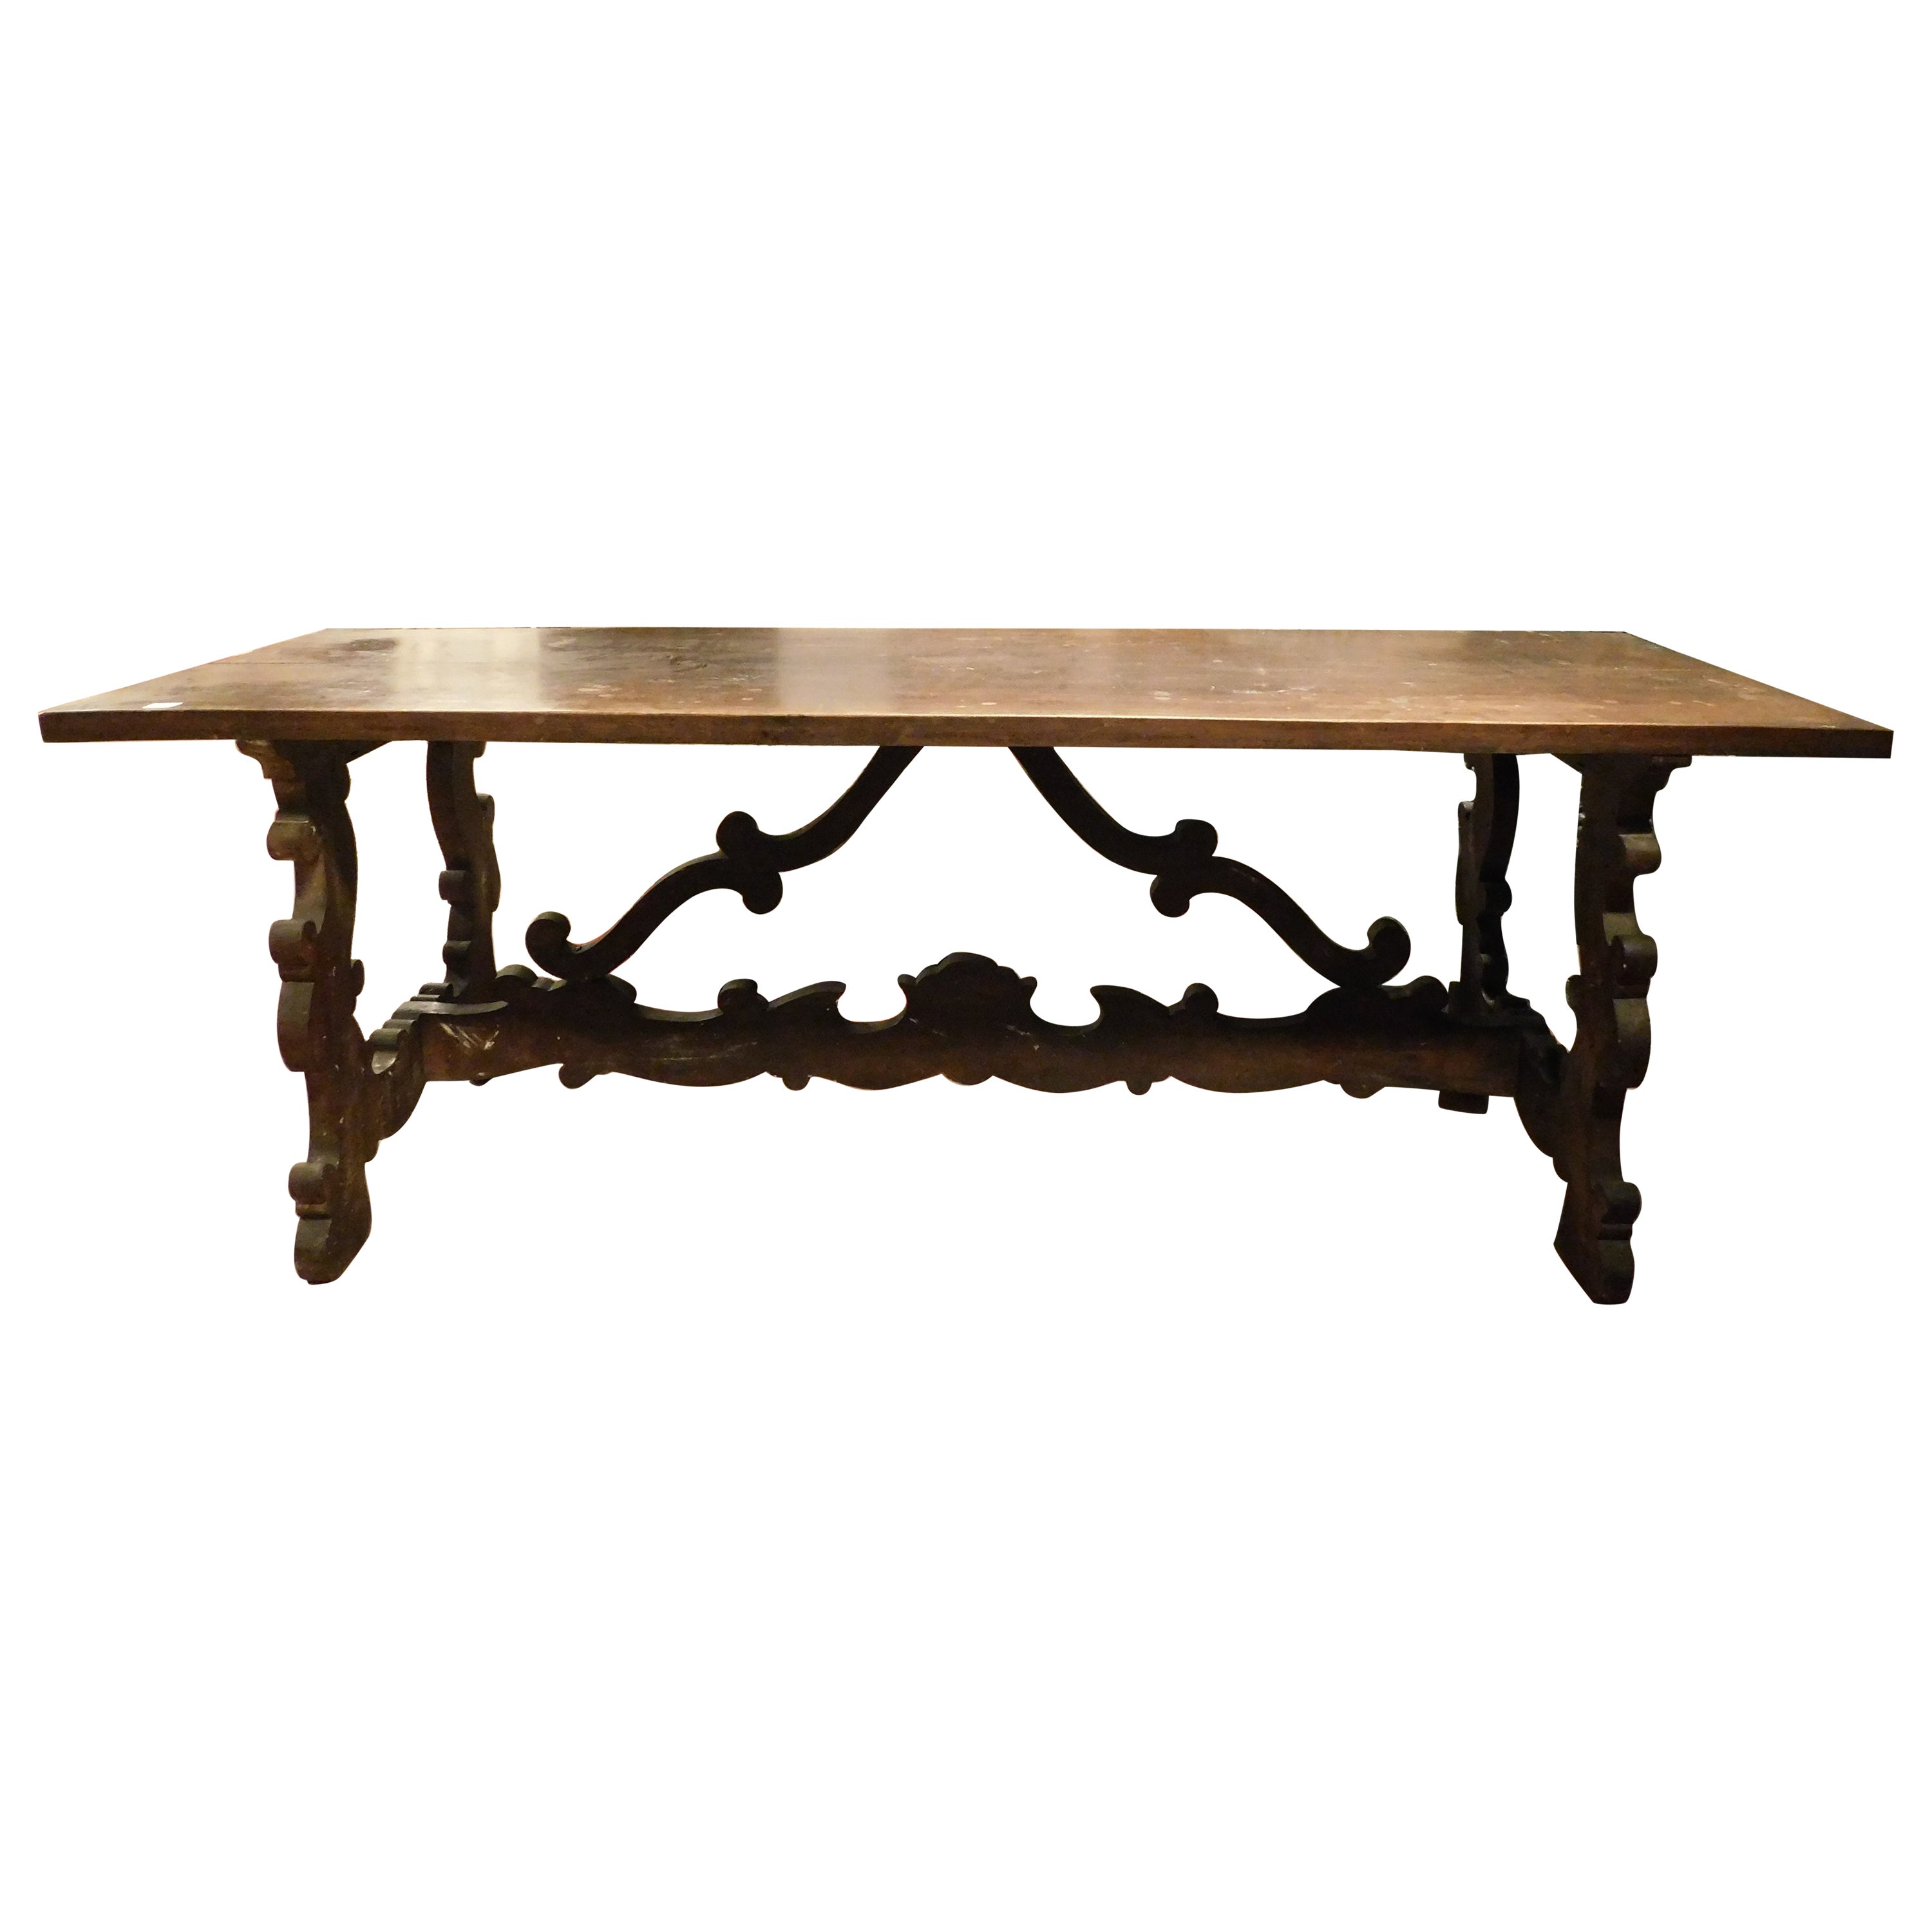 Old refectory table in walnut with wavy legs , dinner table